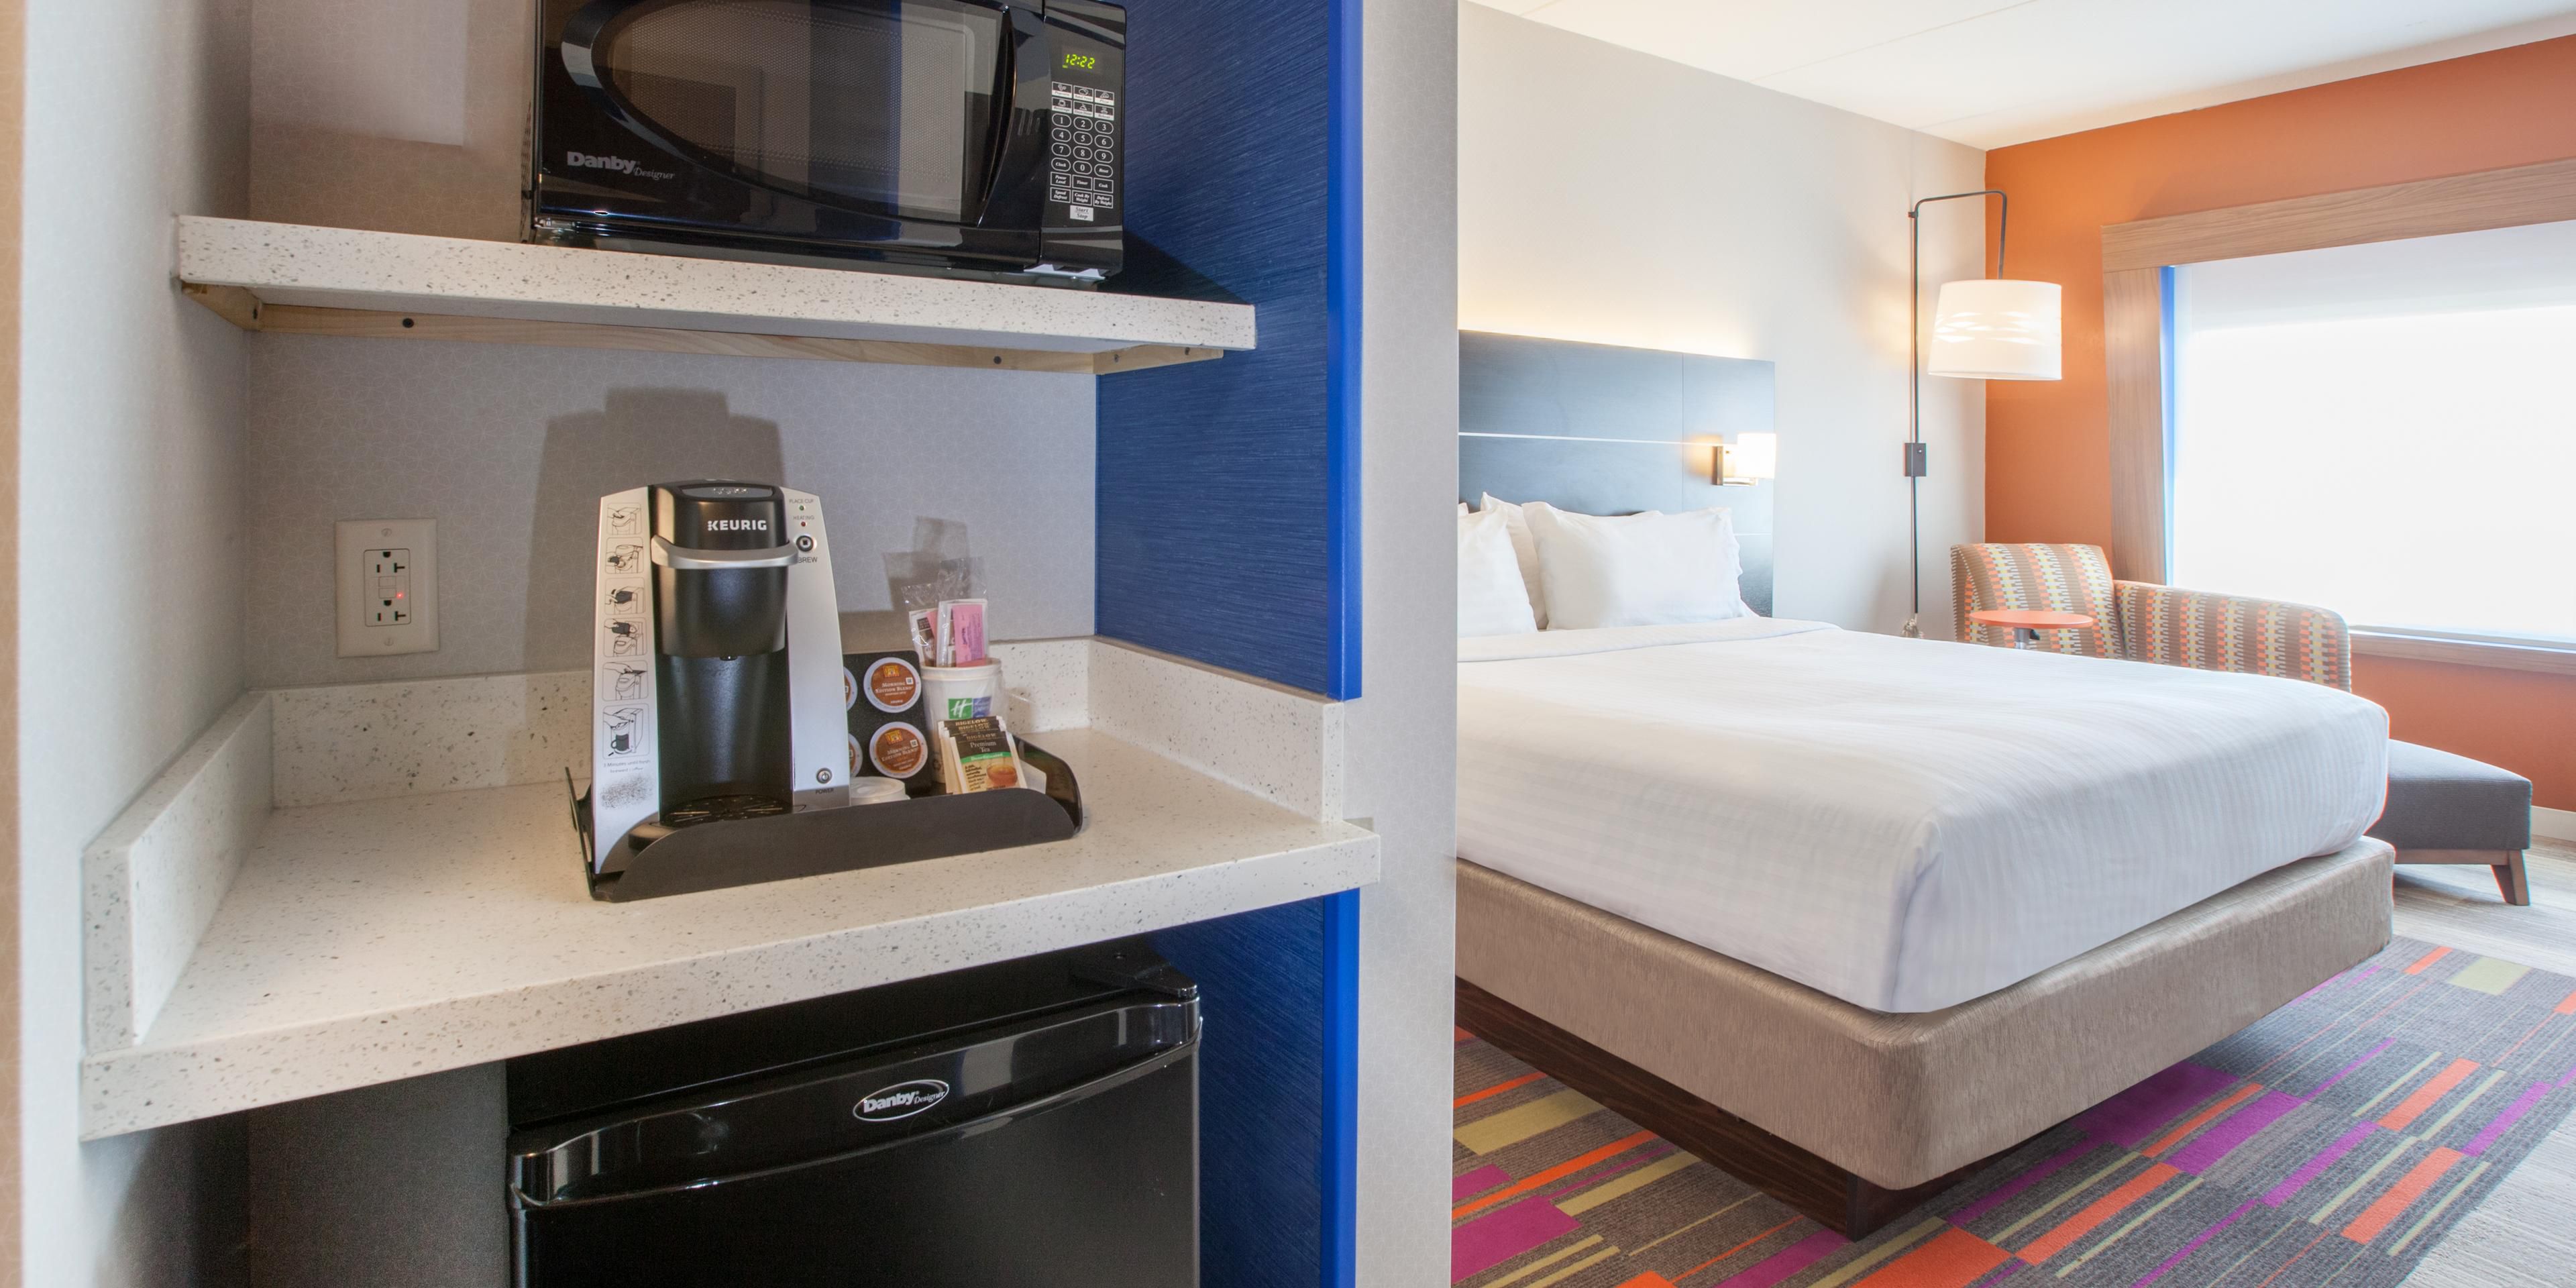 Spacious guest rooms feature multiple charging options for today's travelers. All rooms feature Keurig Coffee Maker, refrigerator & microwave.